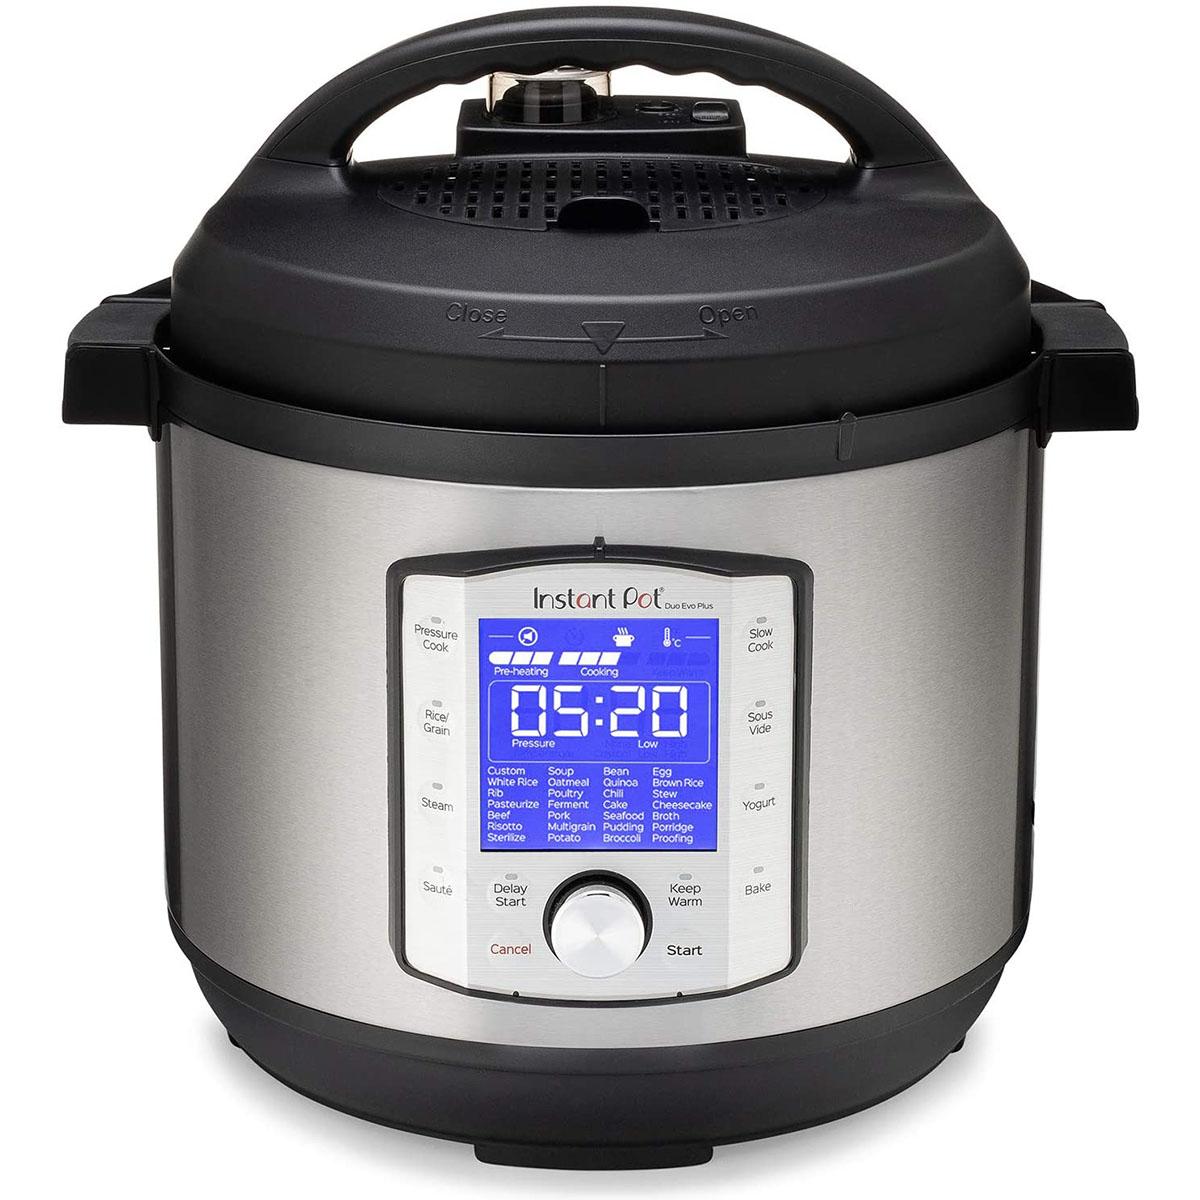 8-Quart Instant Pot Duo Evo Plus Electric Pressure Cooker for $99.95 Shipped